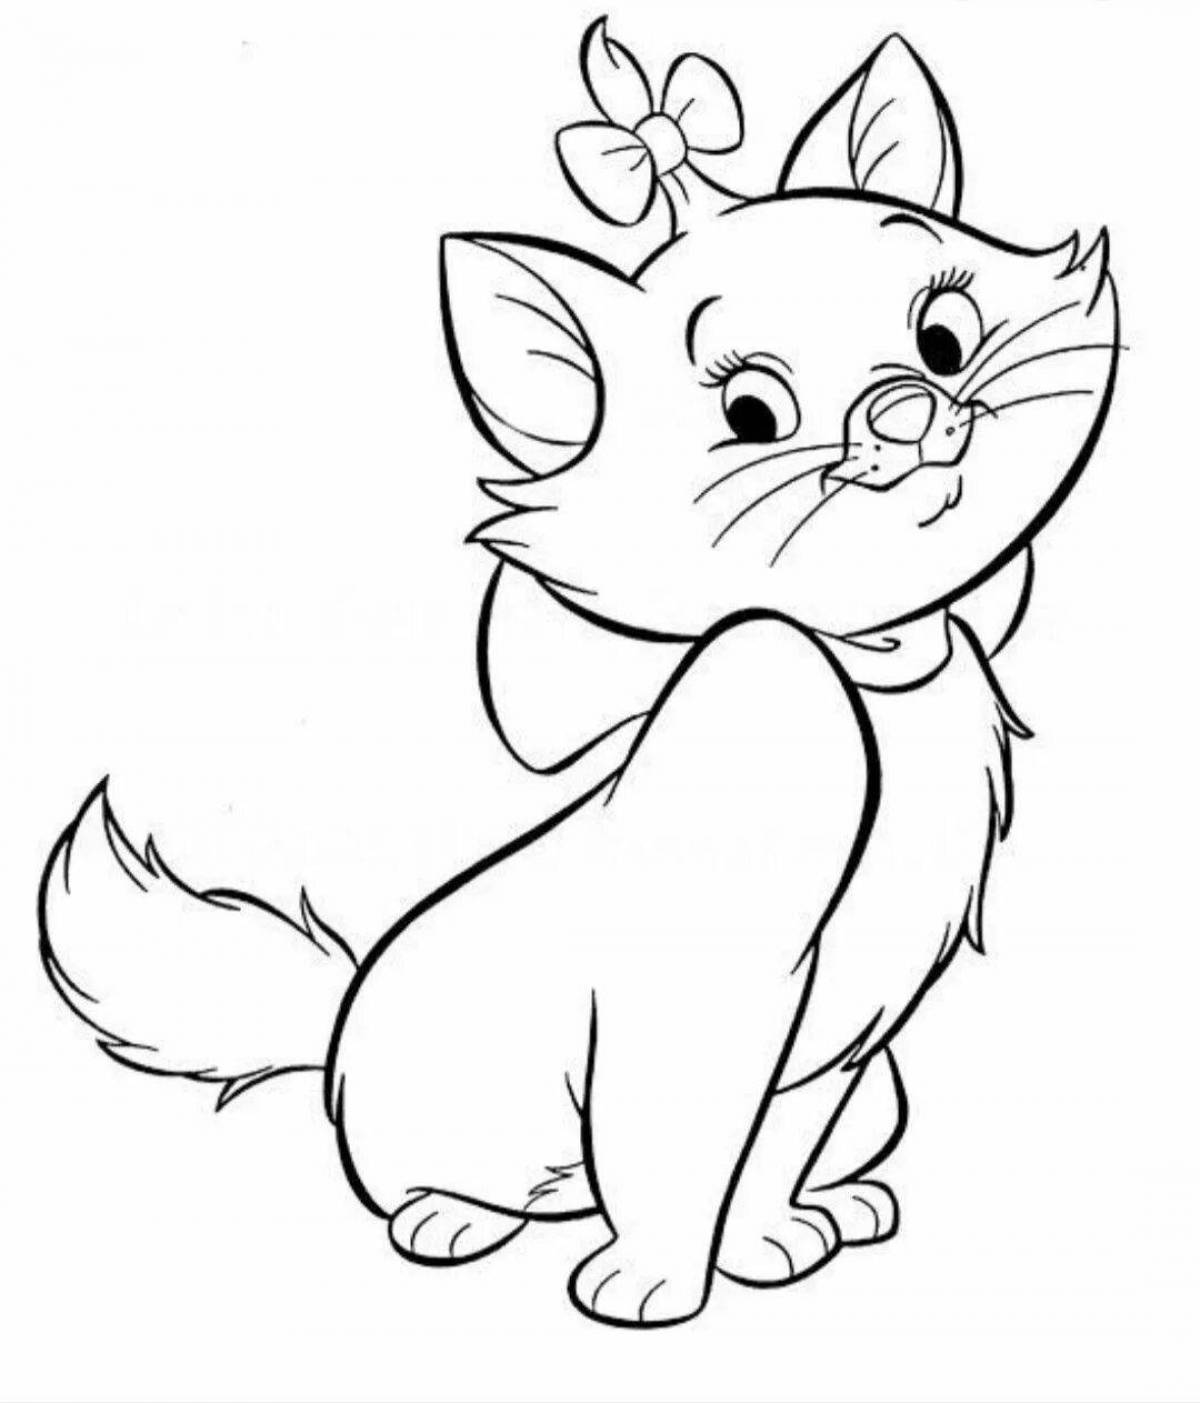 Naughty cat coloring book